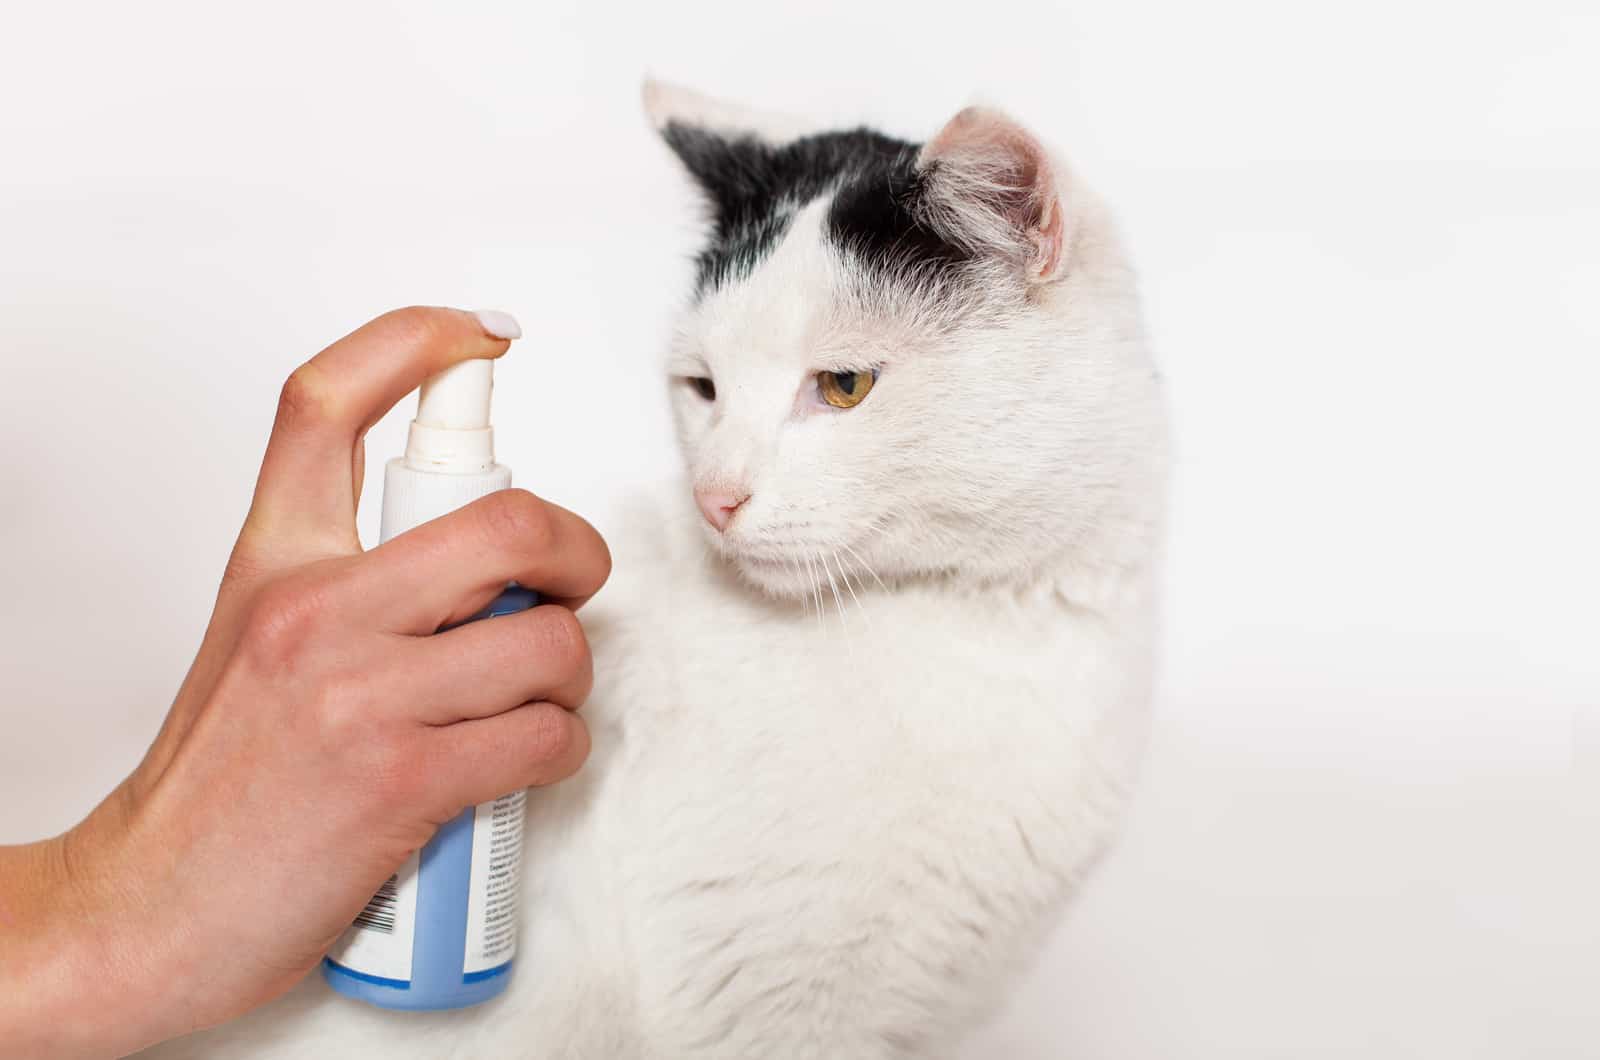 spraying cat with water